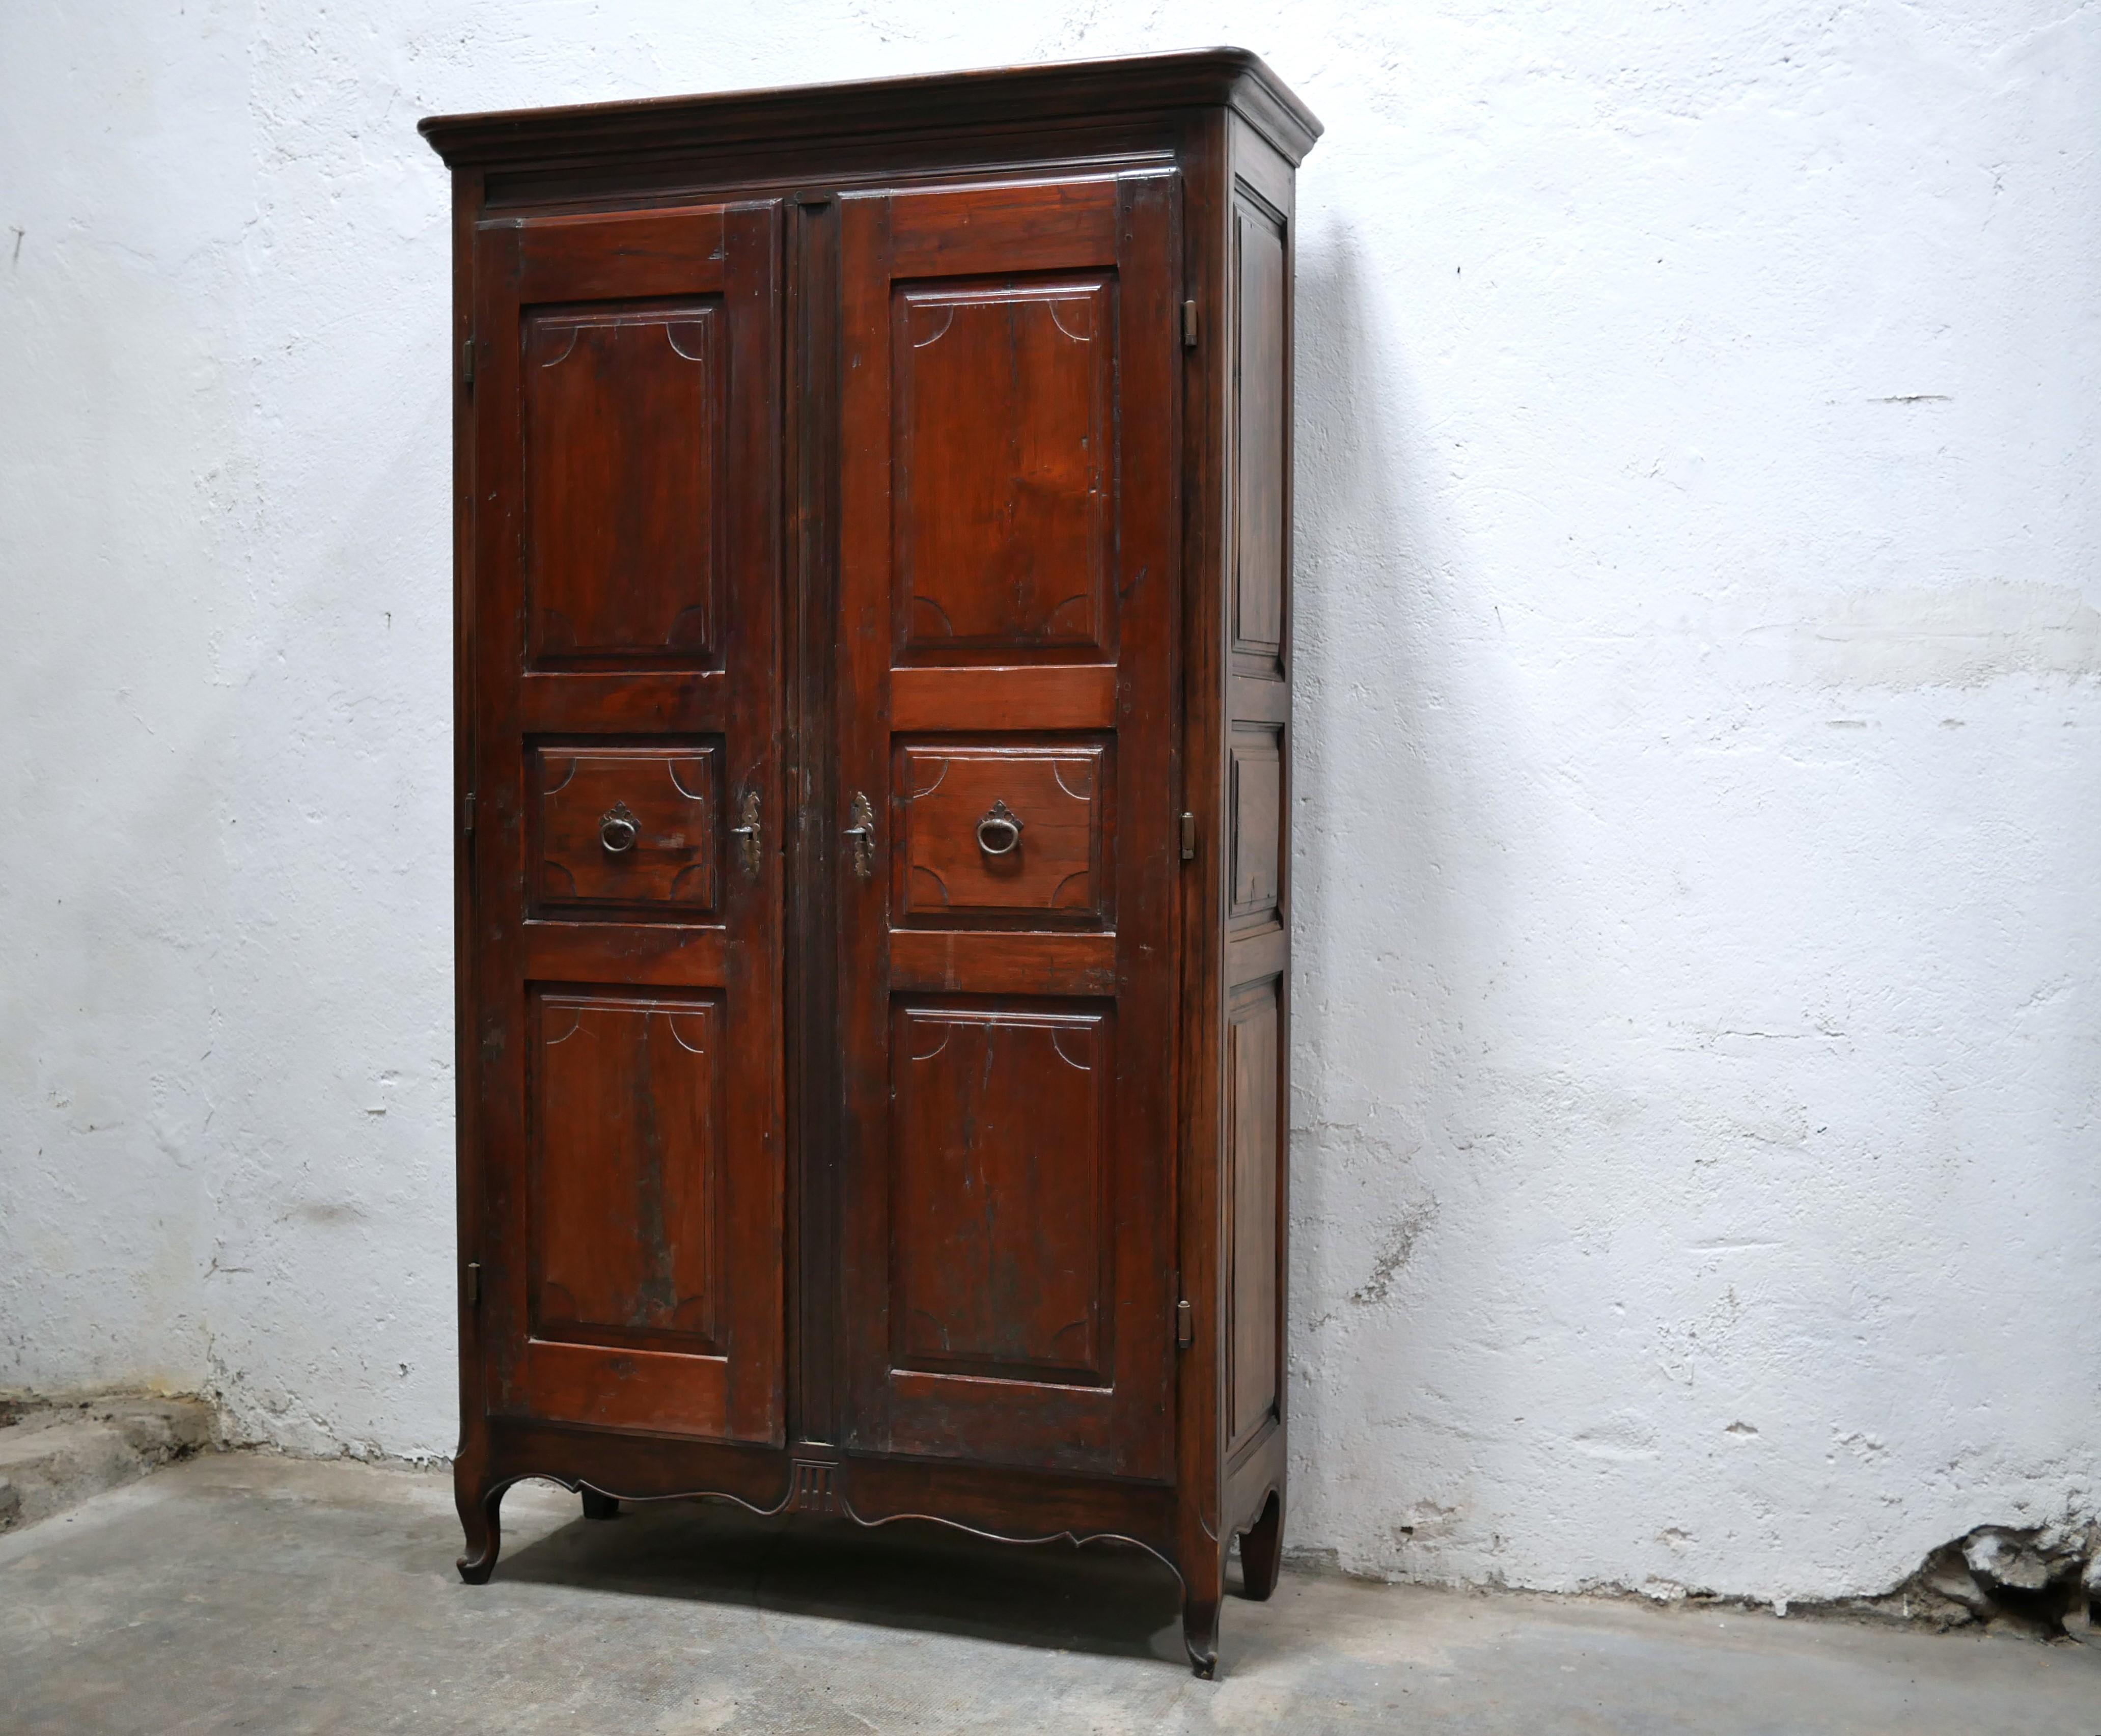 Solid wood wardrobe from the 1940s.

Aesthetic and practical, it will be perfect in a natural country-style decoration.
The color of the wood is deep and warm.
Of good size, it offers valuable storage.
Nice patina of the wood.

Good condition, some